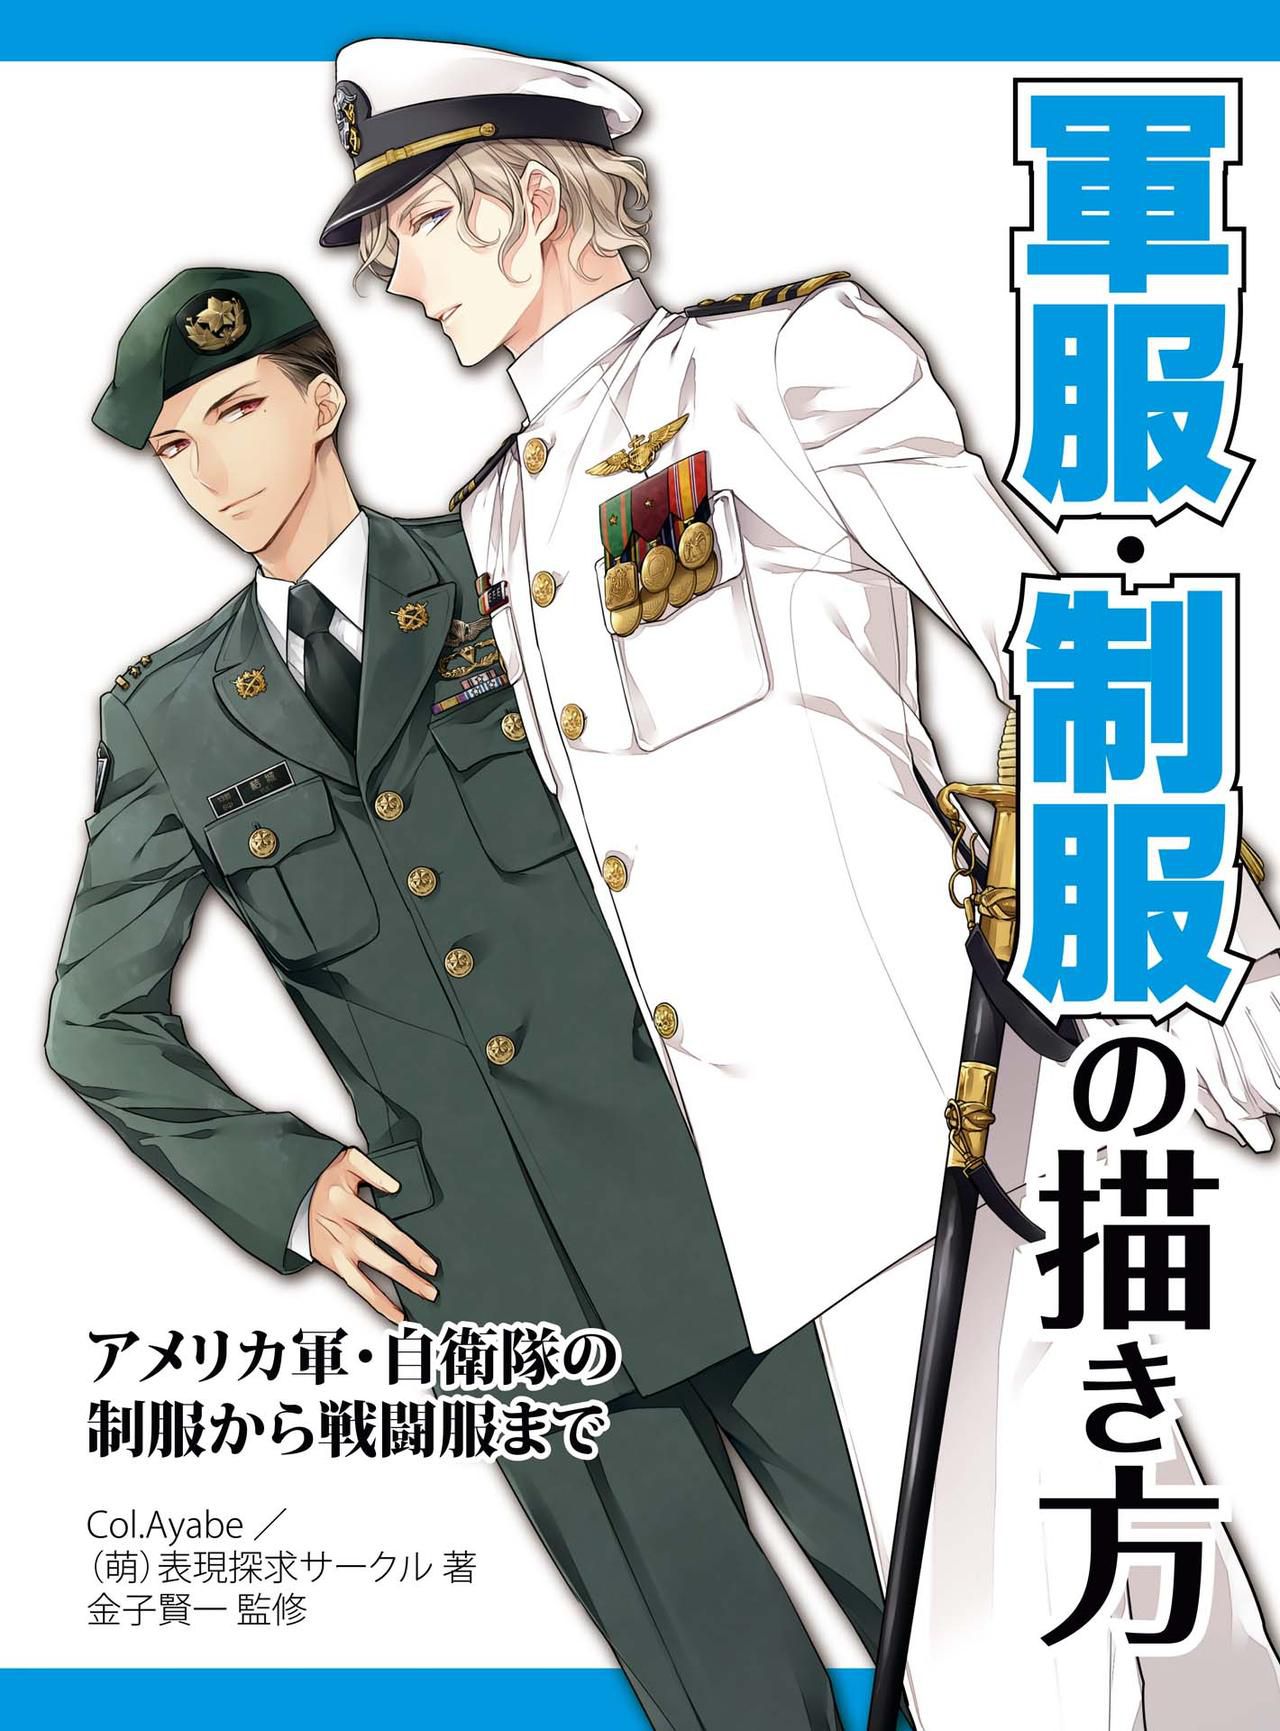 How to draw military uniforms and uniforms From Self-Defense Forces 軍服・制服の描き方 アメリカ軍・自衛隊の制服から戦闘服まで 1